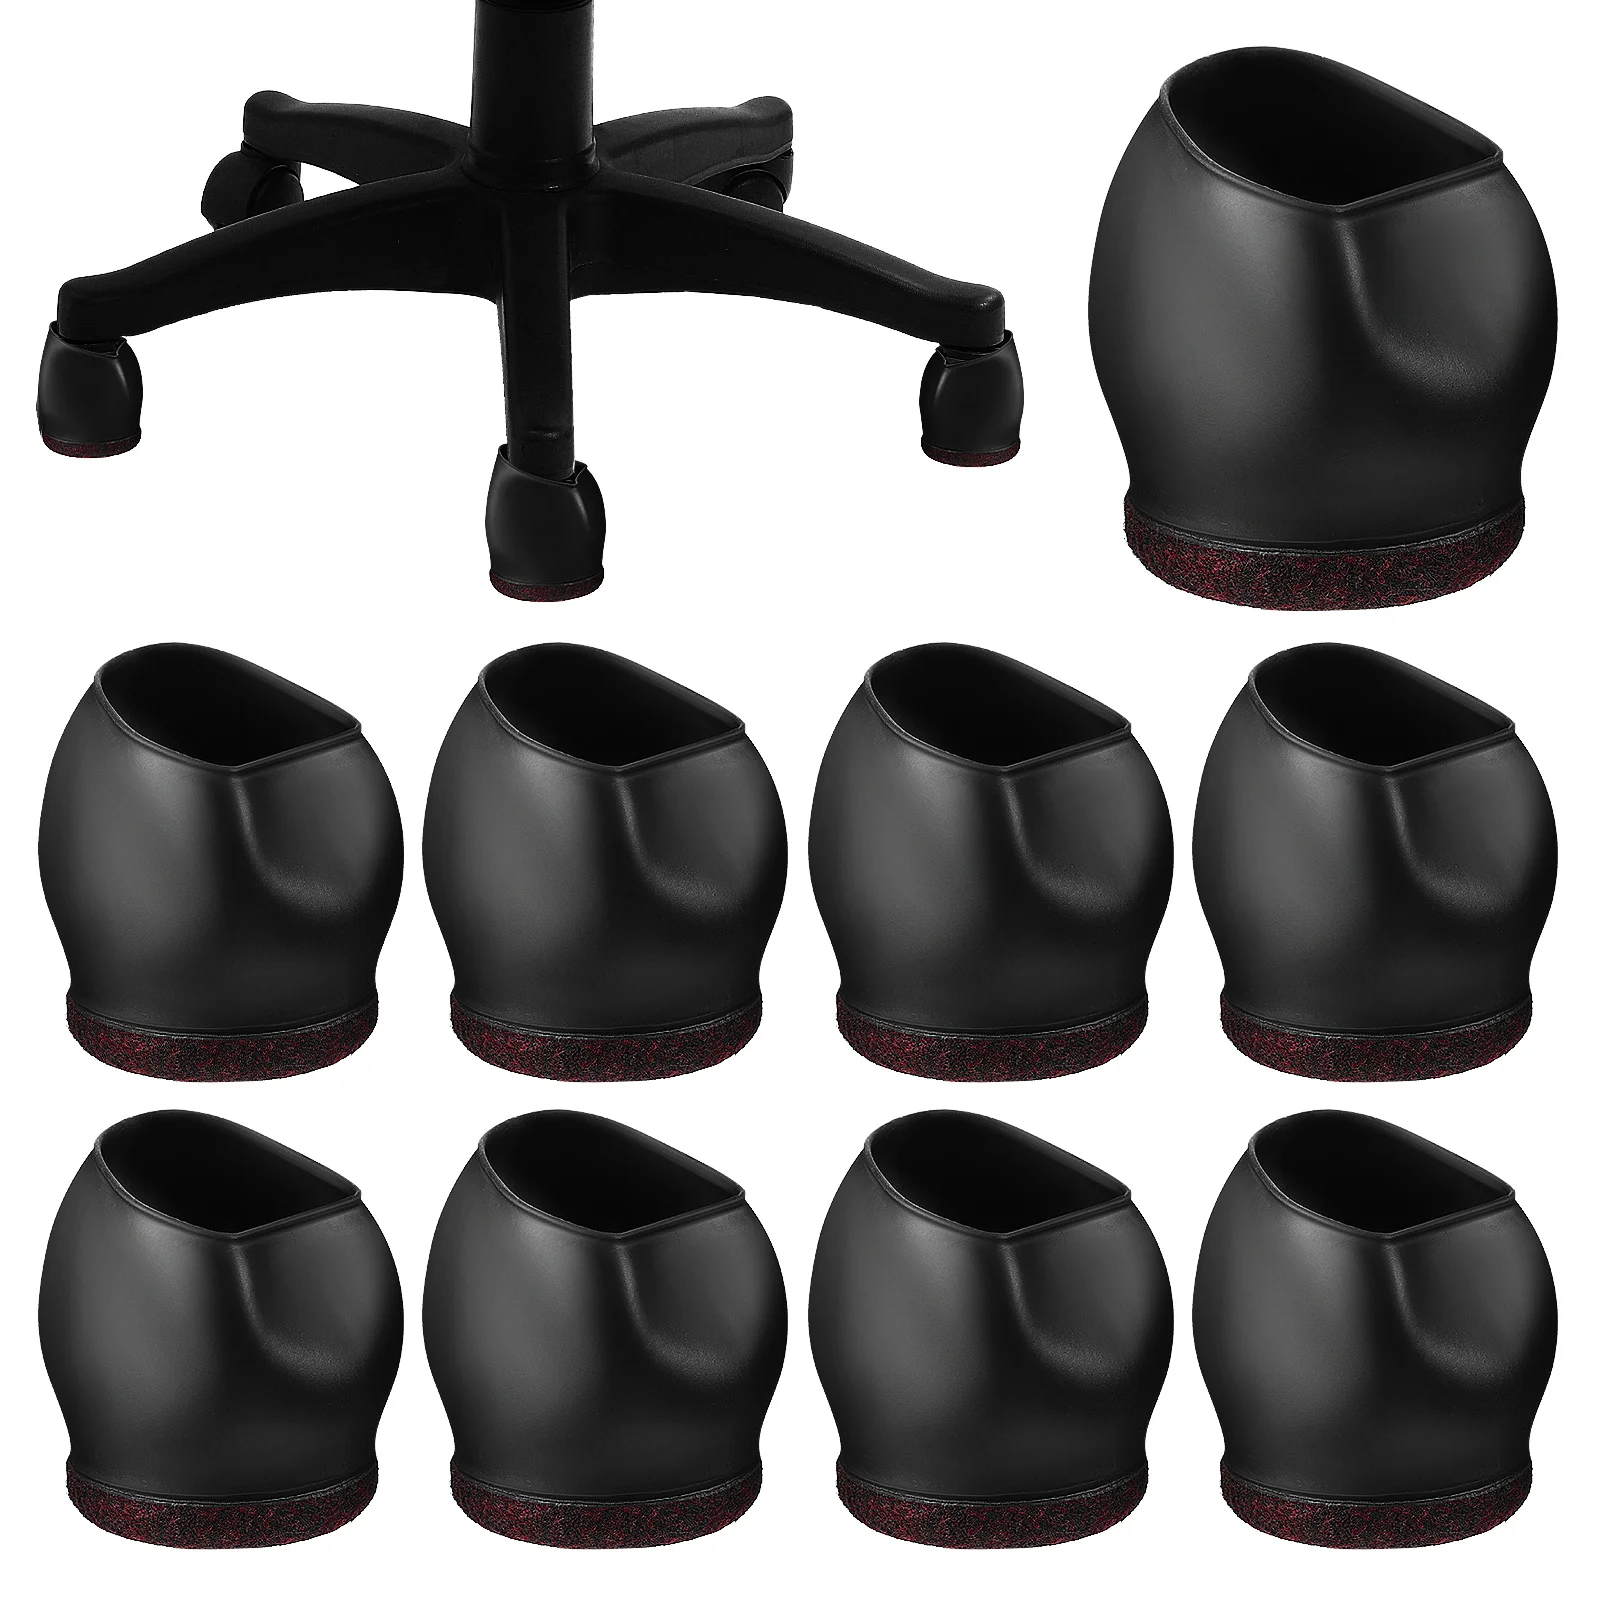 

10 Pcs Chair Leg Floor Protector Wheel Stoppers Rolling Chairs Office Tables Protectors Caster Cups Tpe Carpet